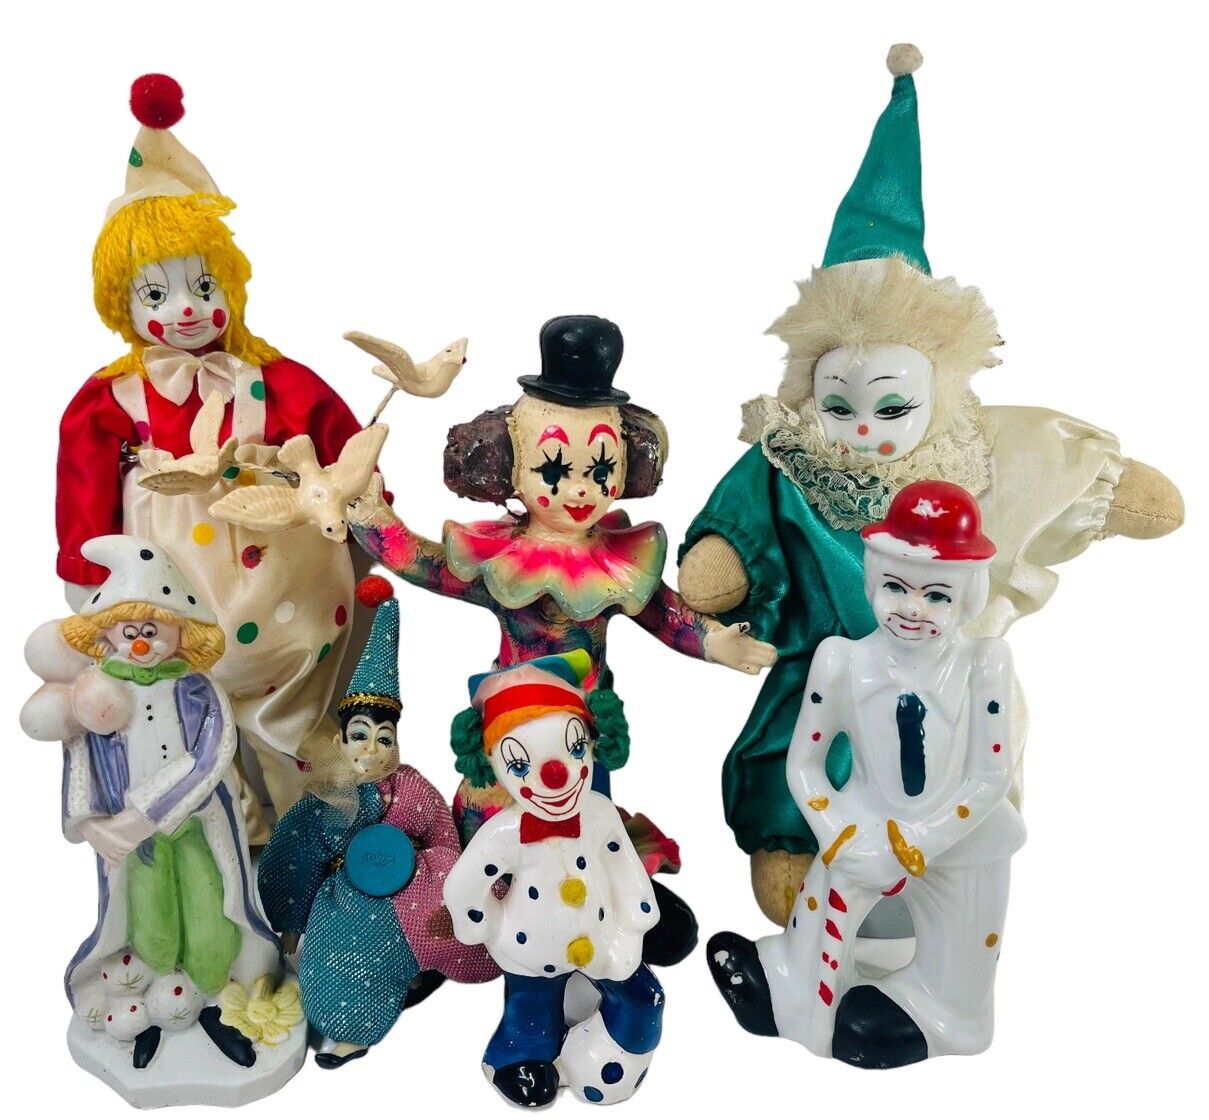 Vintage Clowns SIZES & SHAPES Made of Porcelain, Ceramic & Clay-Assortment of 7 